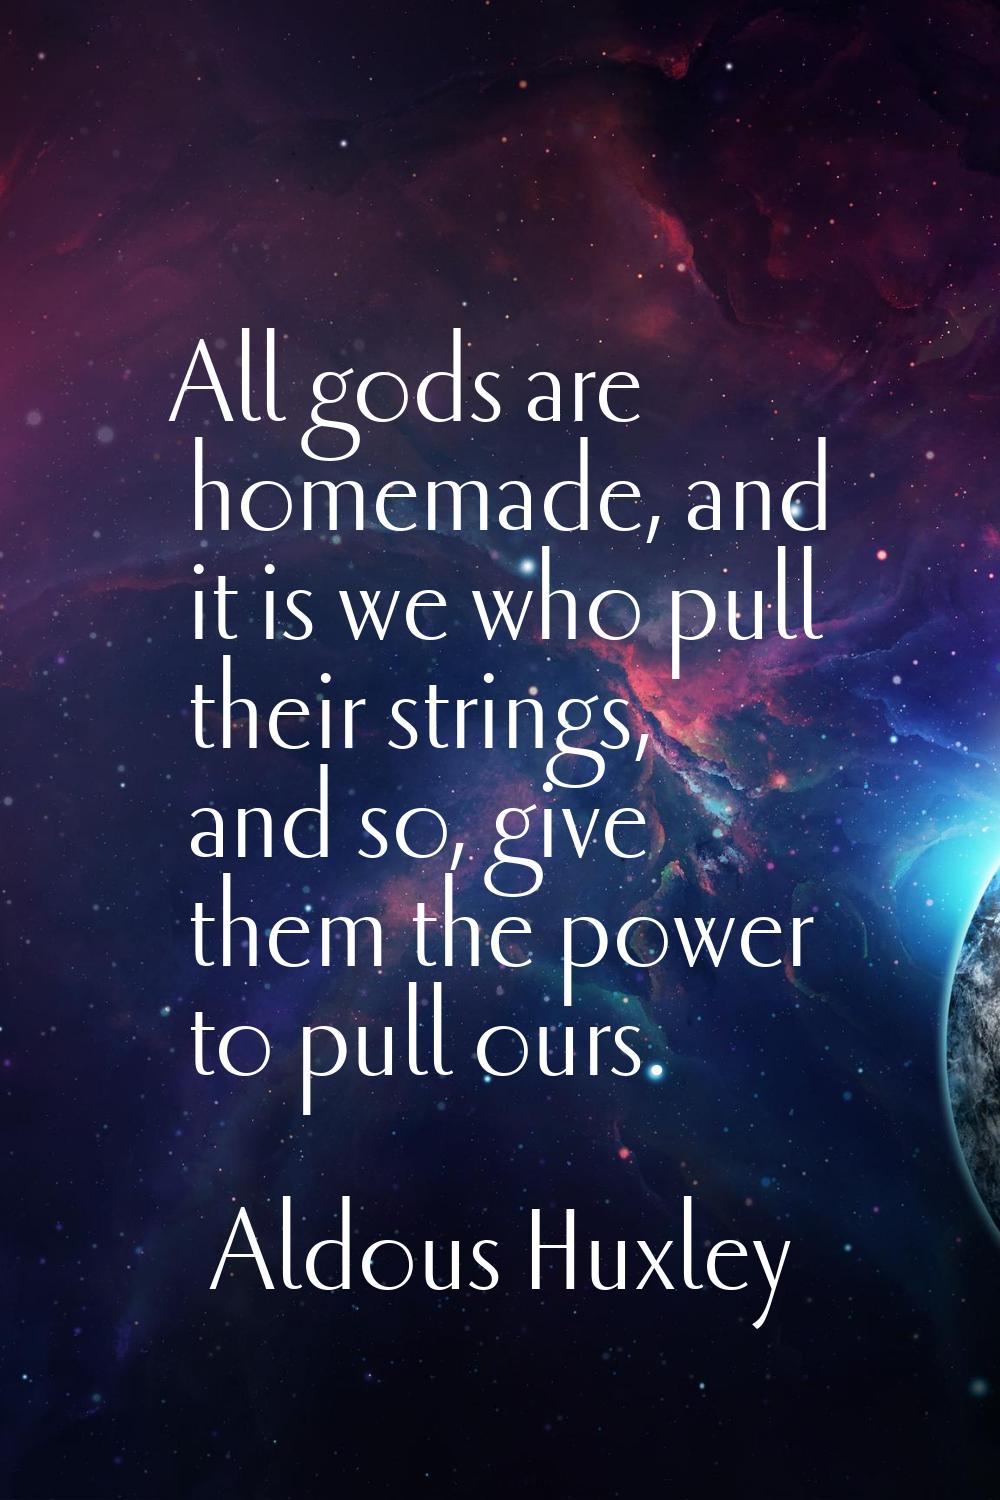 All gods are homemade, and it is we who pull their strings, and so, give them the power to pull our